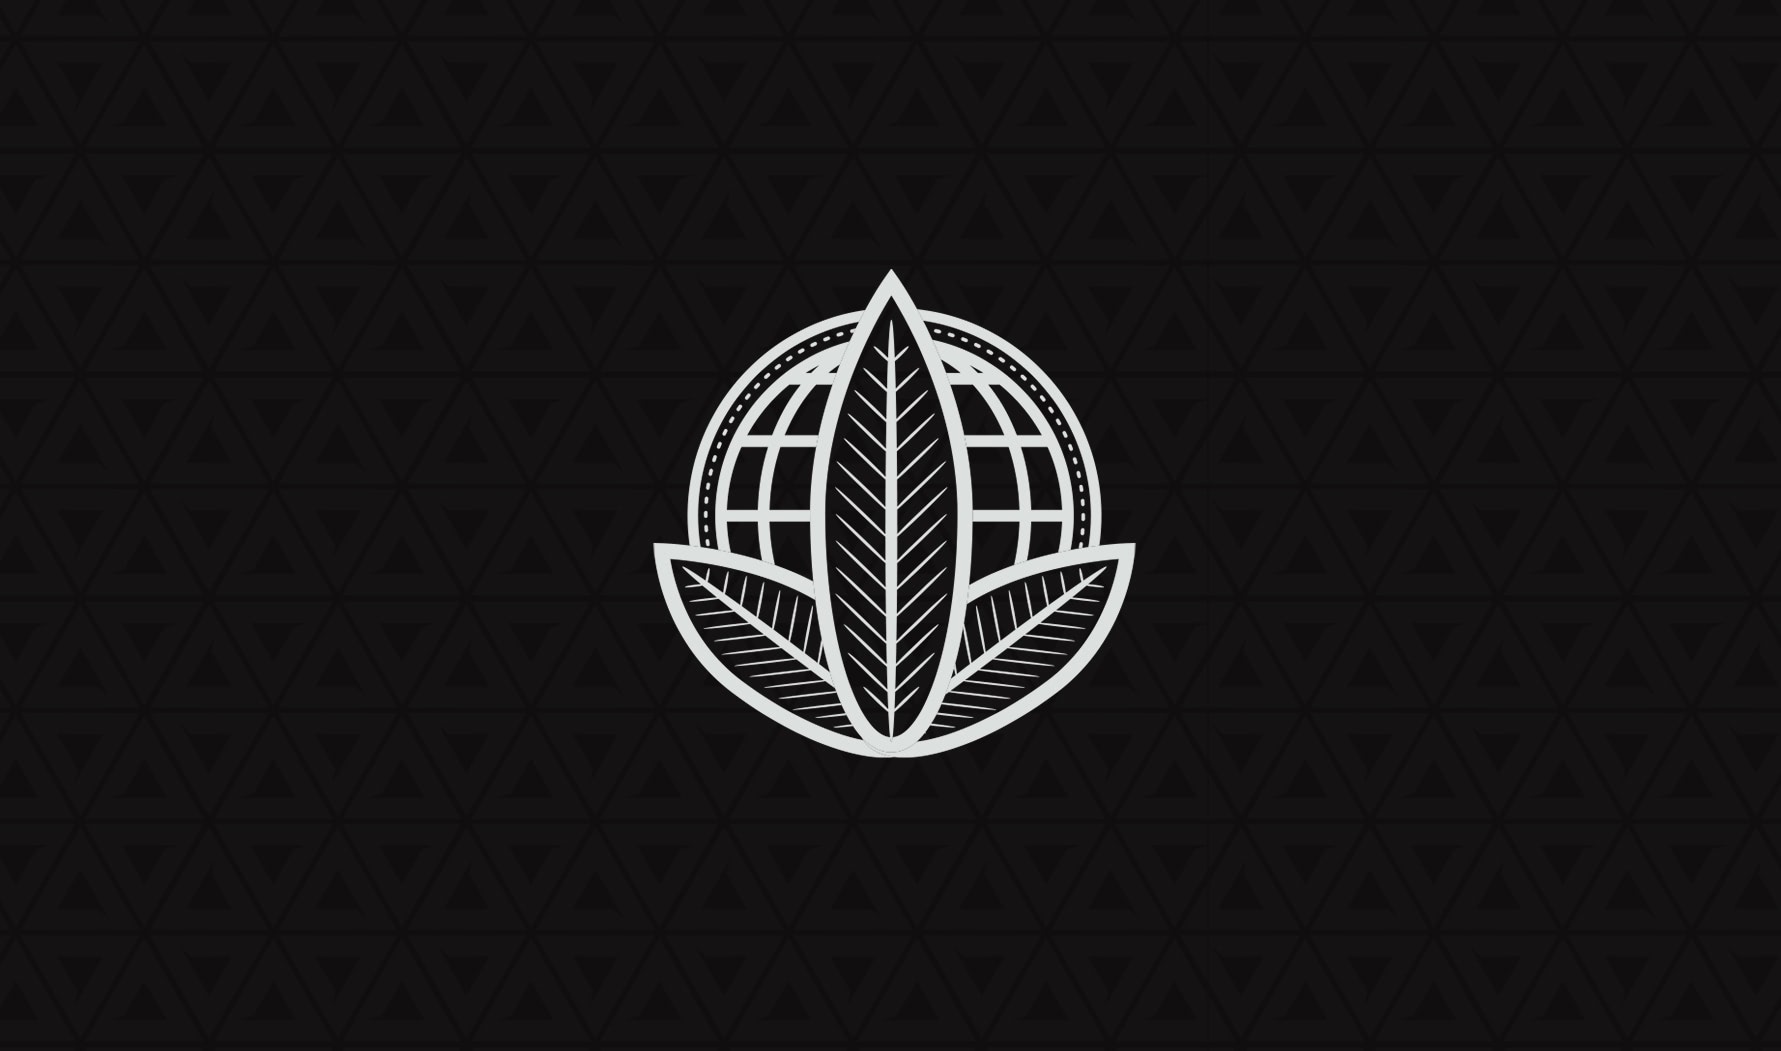 SLANG Worldwide and Gage Cannabis Co. Partner to Bring Leading Portfolio of Cannabis Products to Michigan